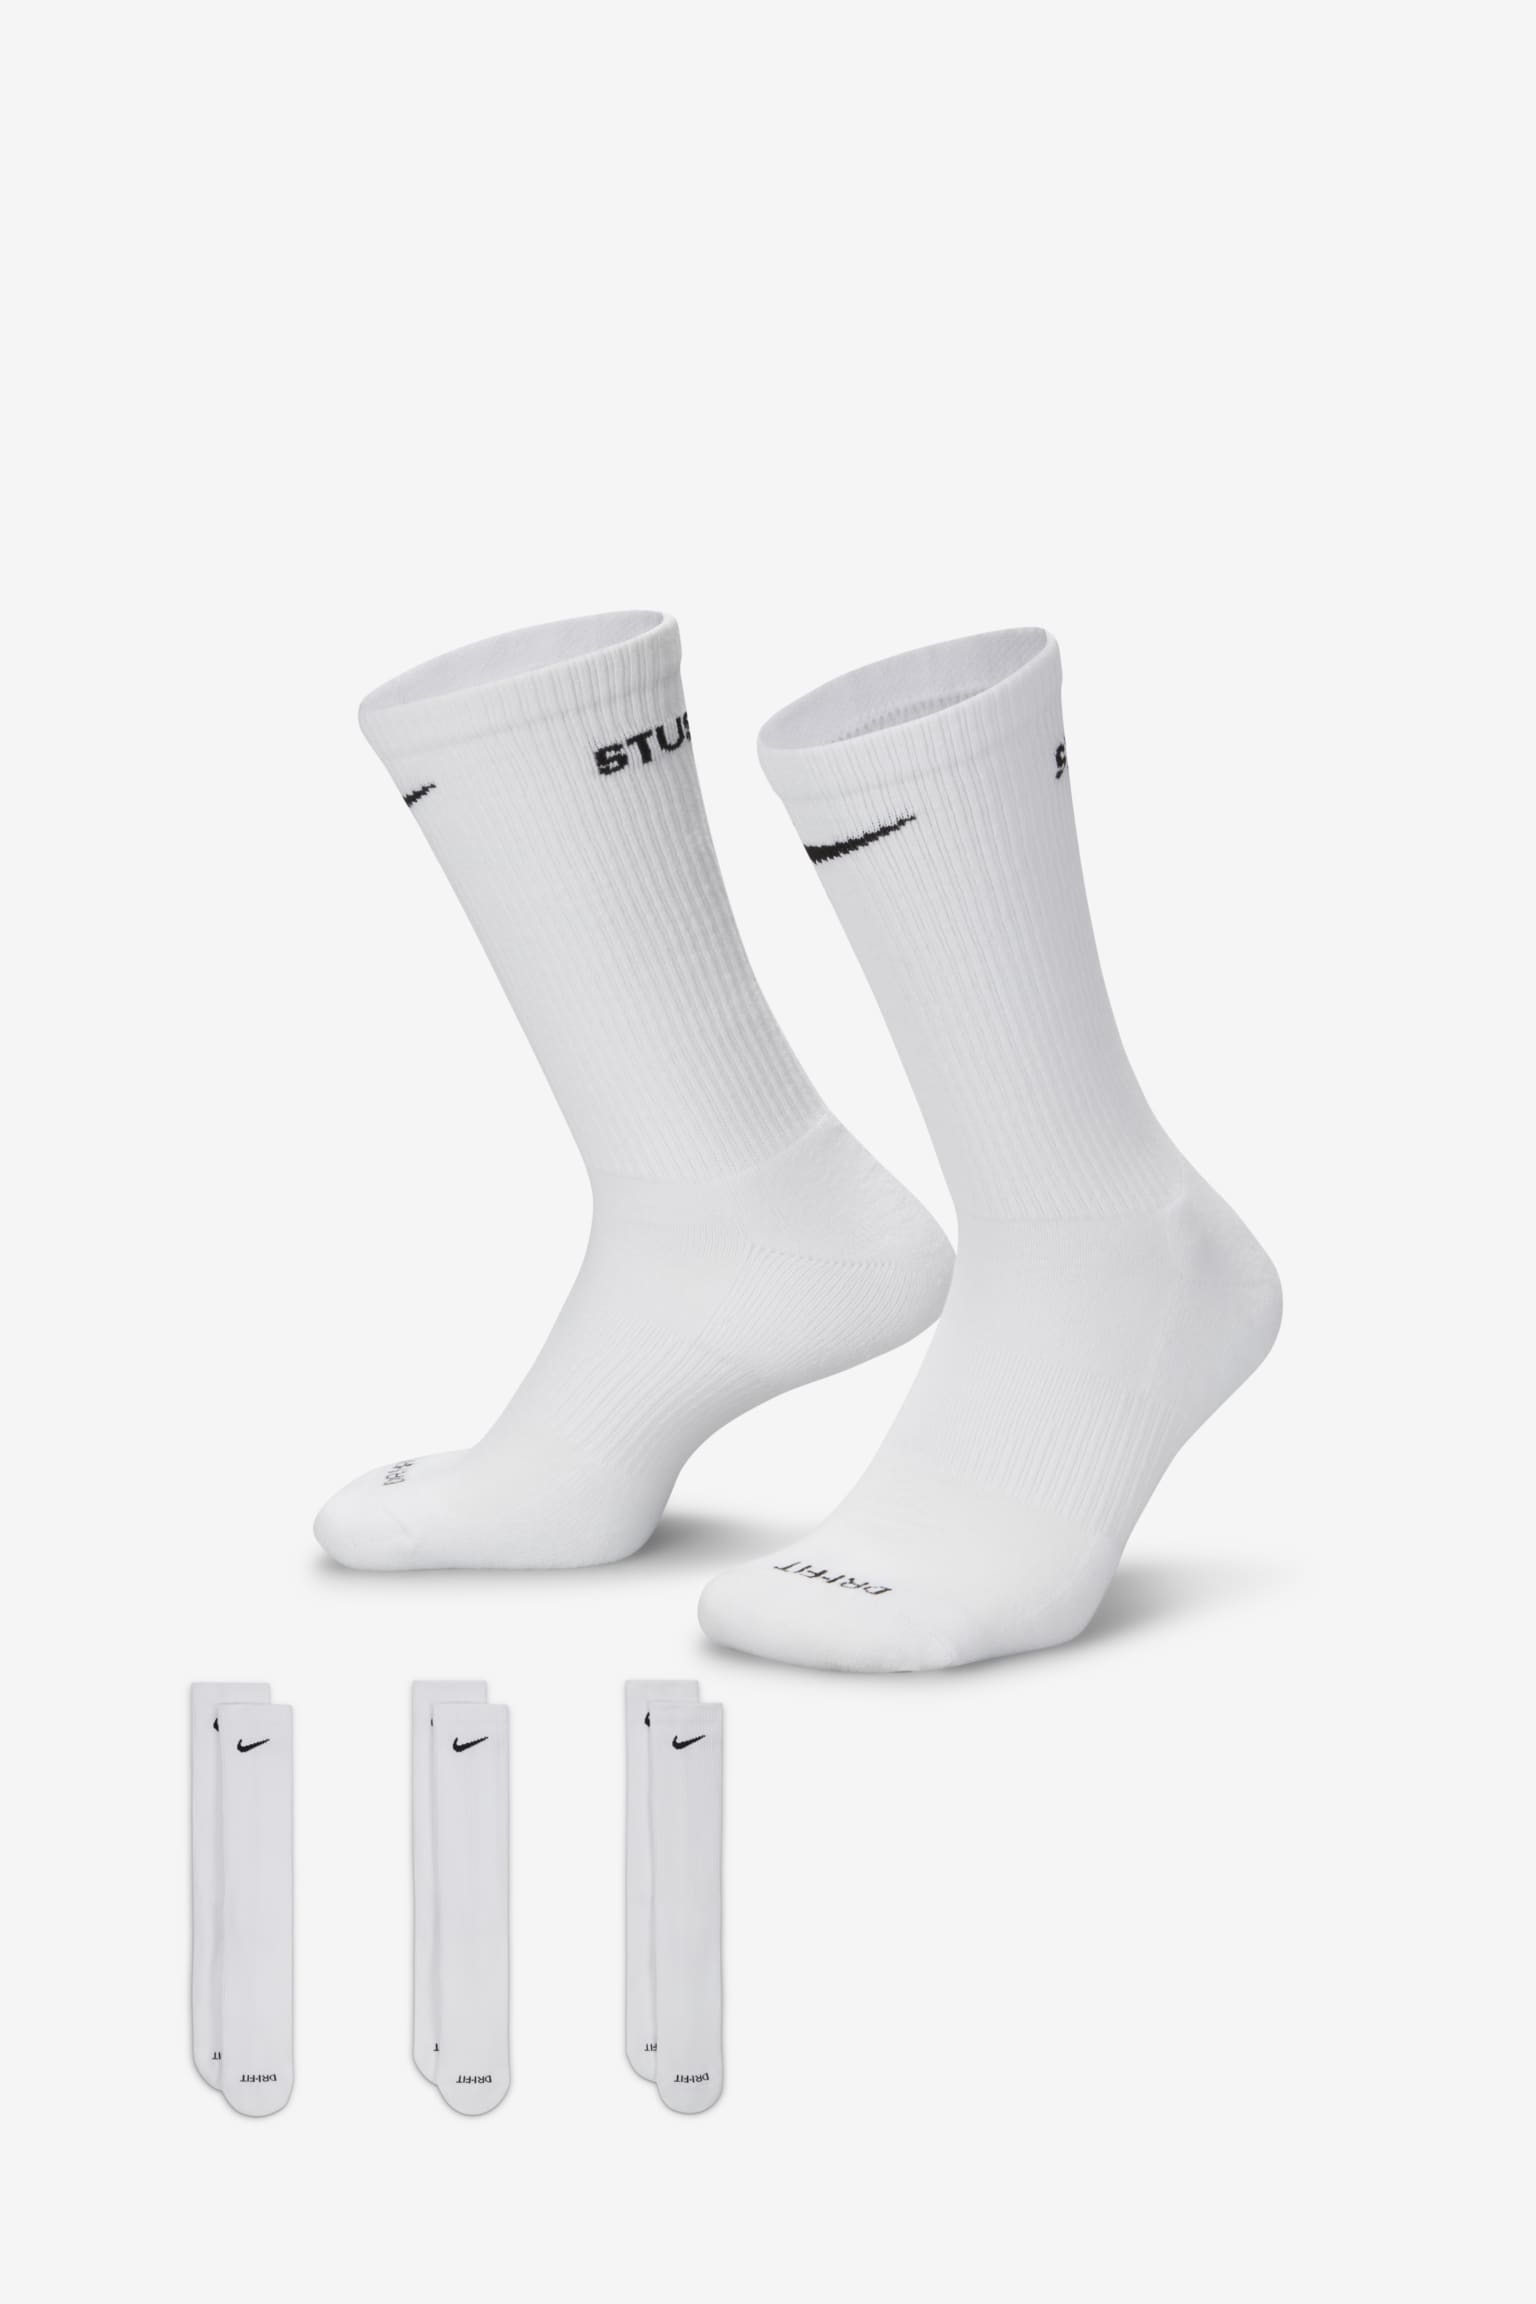 NIKE公式】Nike x Stüssy Accessories Collection. Nike SNKRS JP